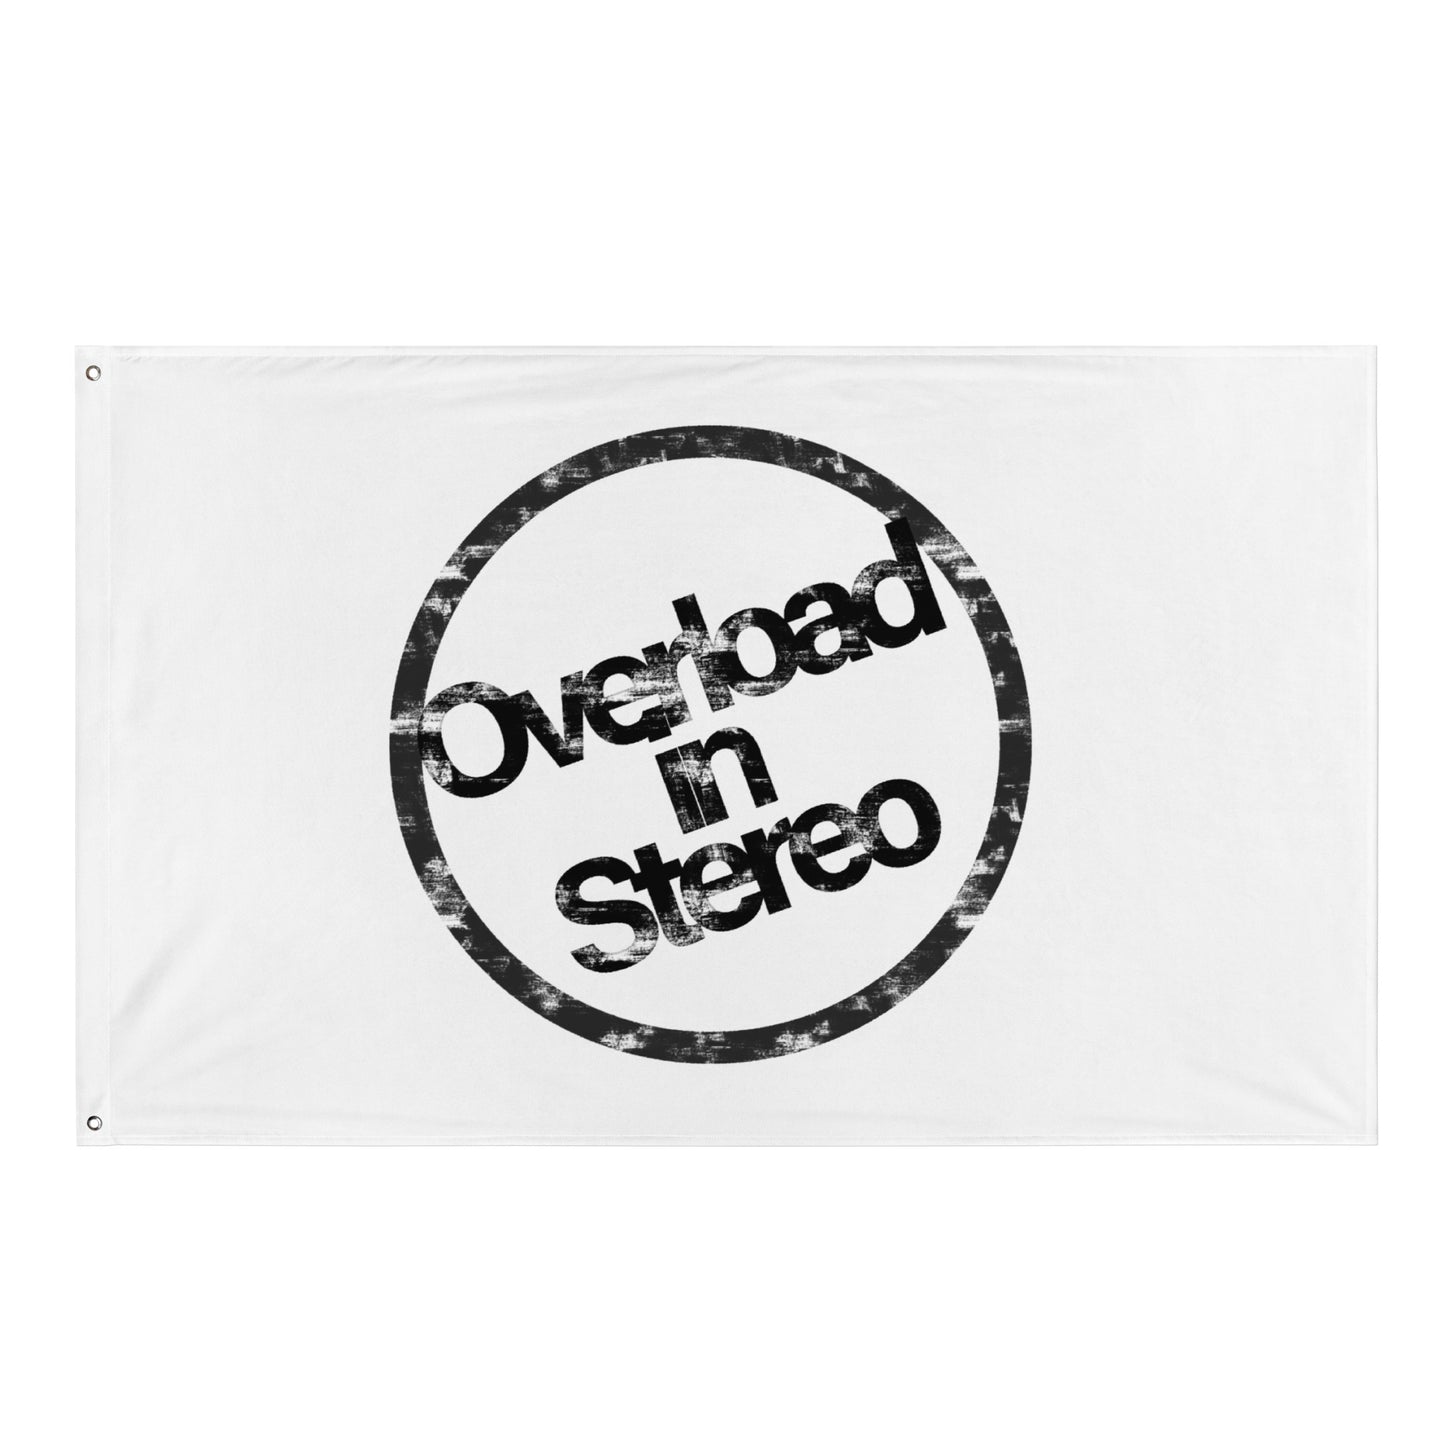 Overload in Stereo Flag